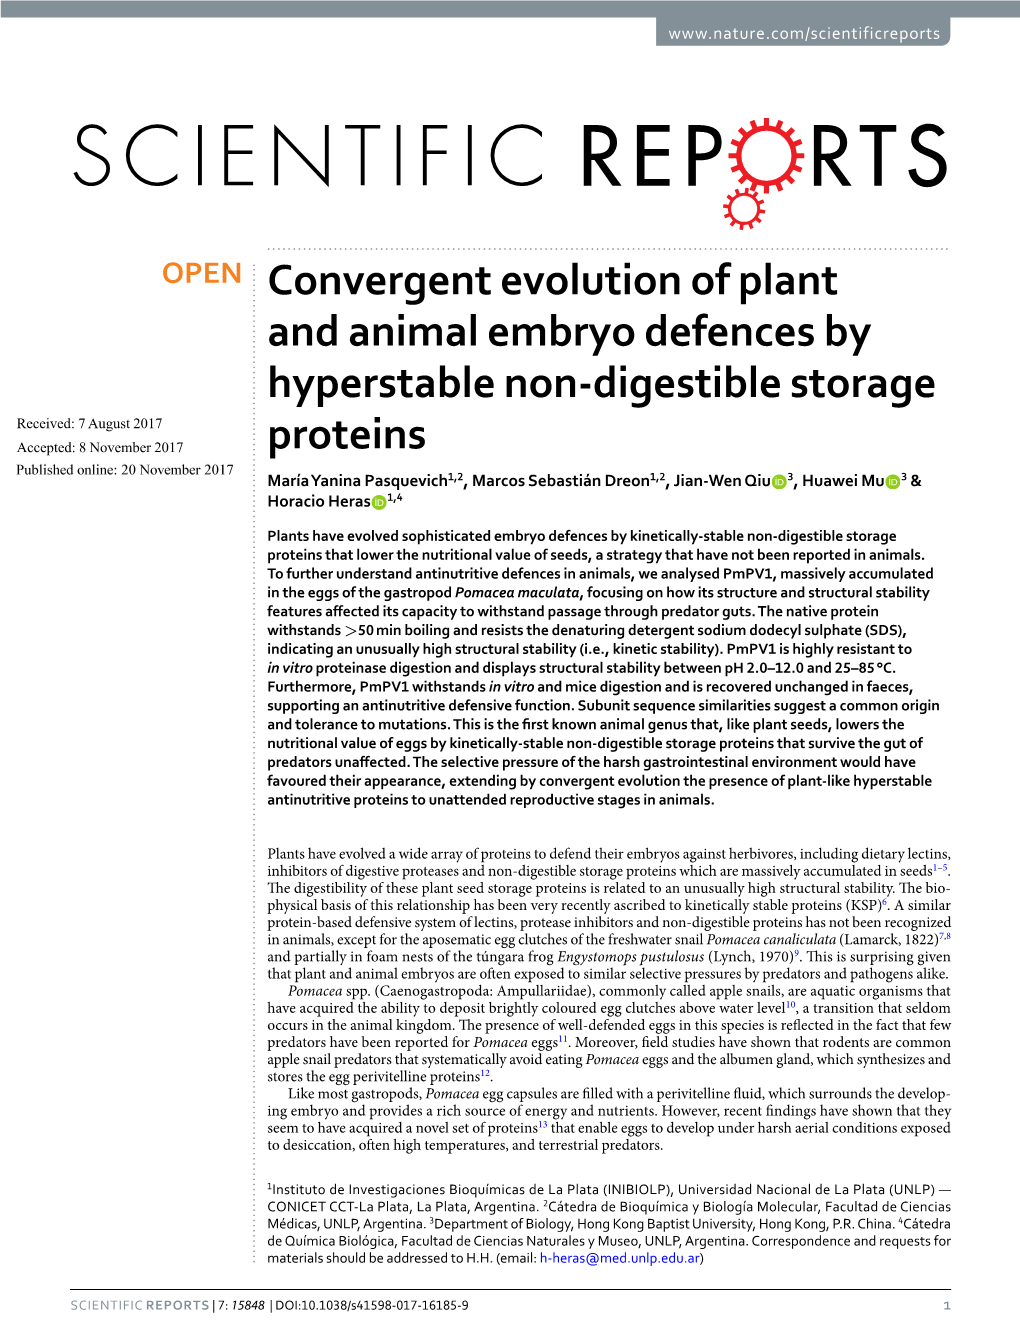 Convergent Evolution of Plant and Animal Embryo Defences